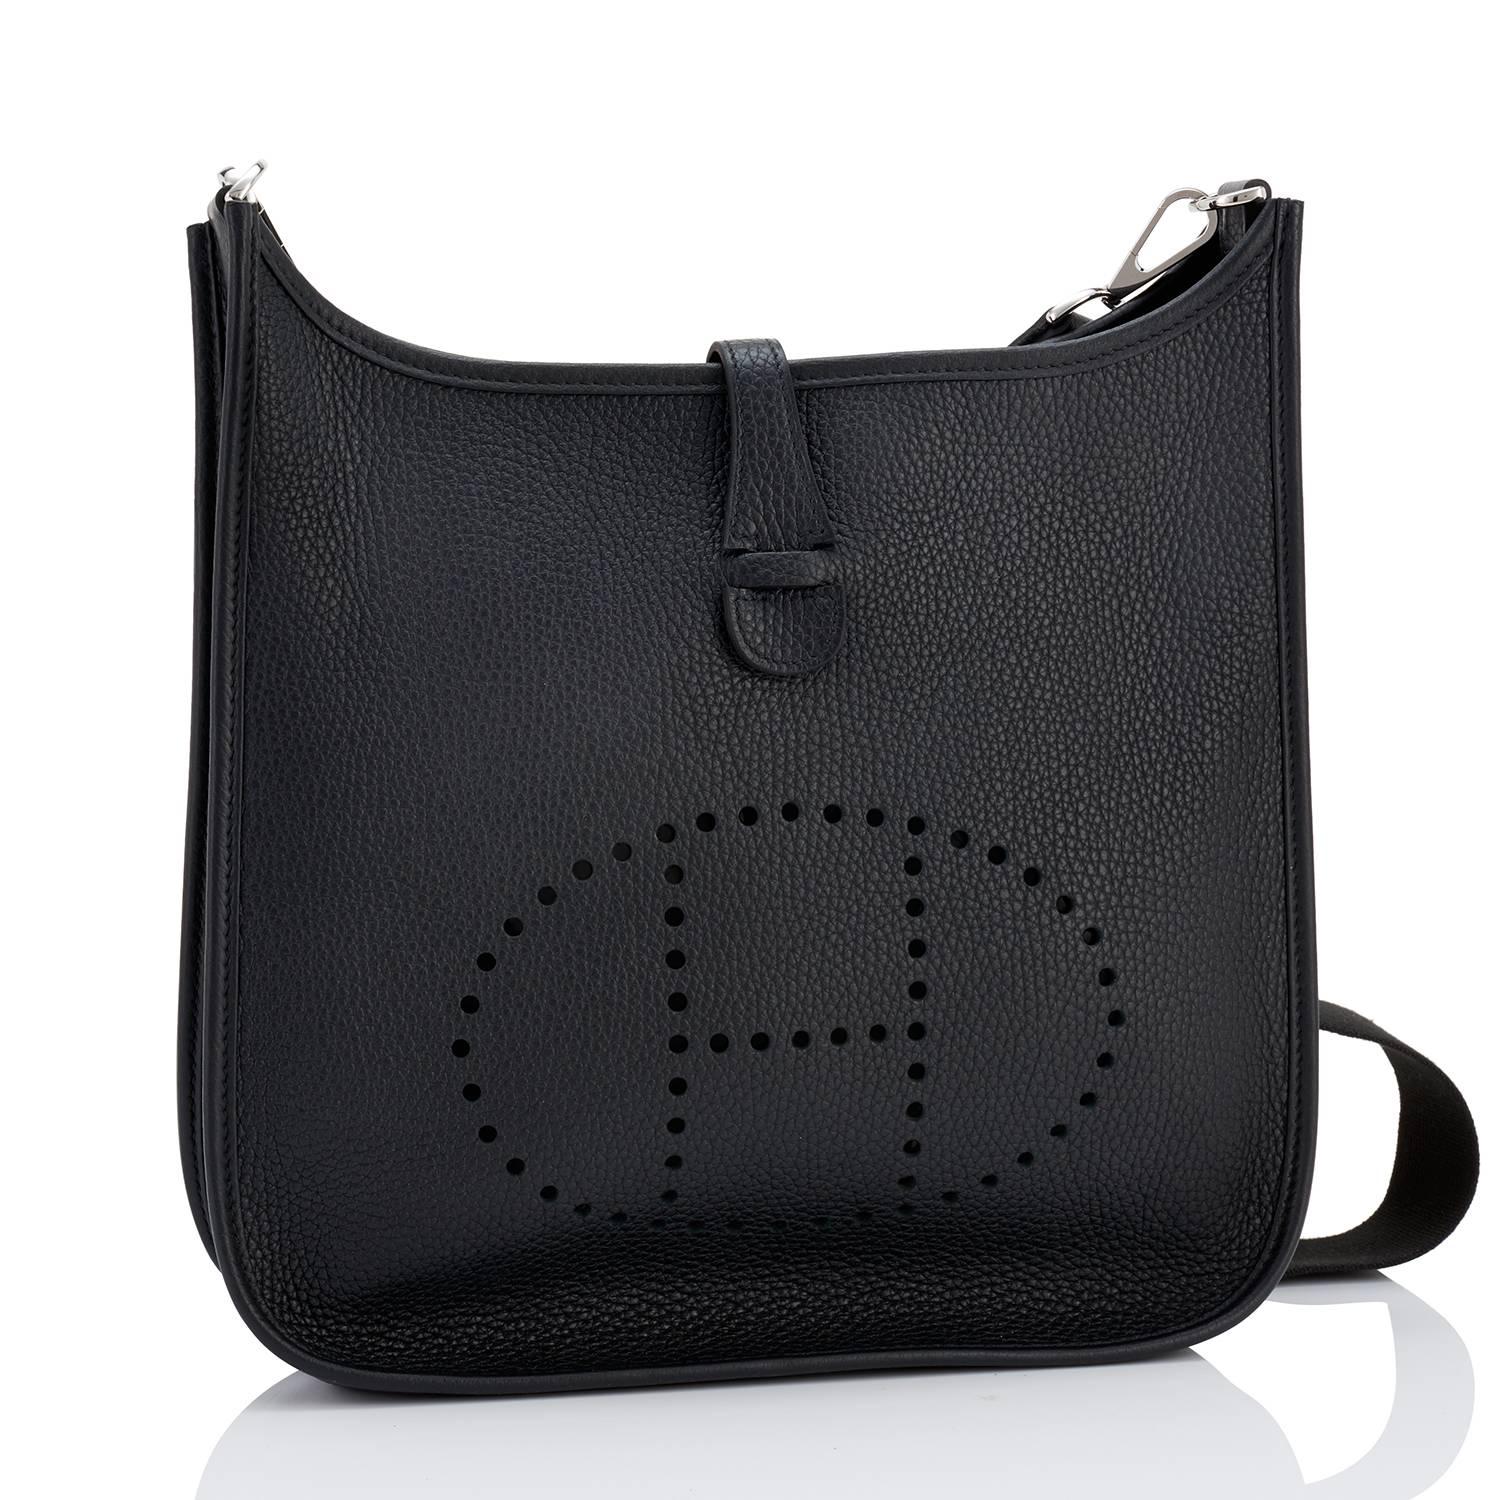 Hermes Black Evelyne PM Cross-Body Messenger Bag Chic
Brand New in Box. Pristine condition.
Store Fresh!  Brand New 2018 Production Evelyne bearing C stamp.
Perfect gift! Comes with with shoulder strap, sleeper for bag and signature orange Hermes